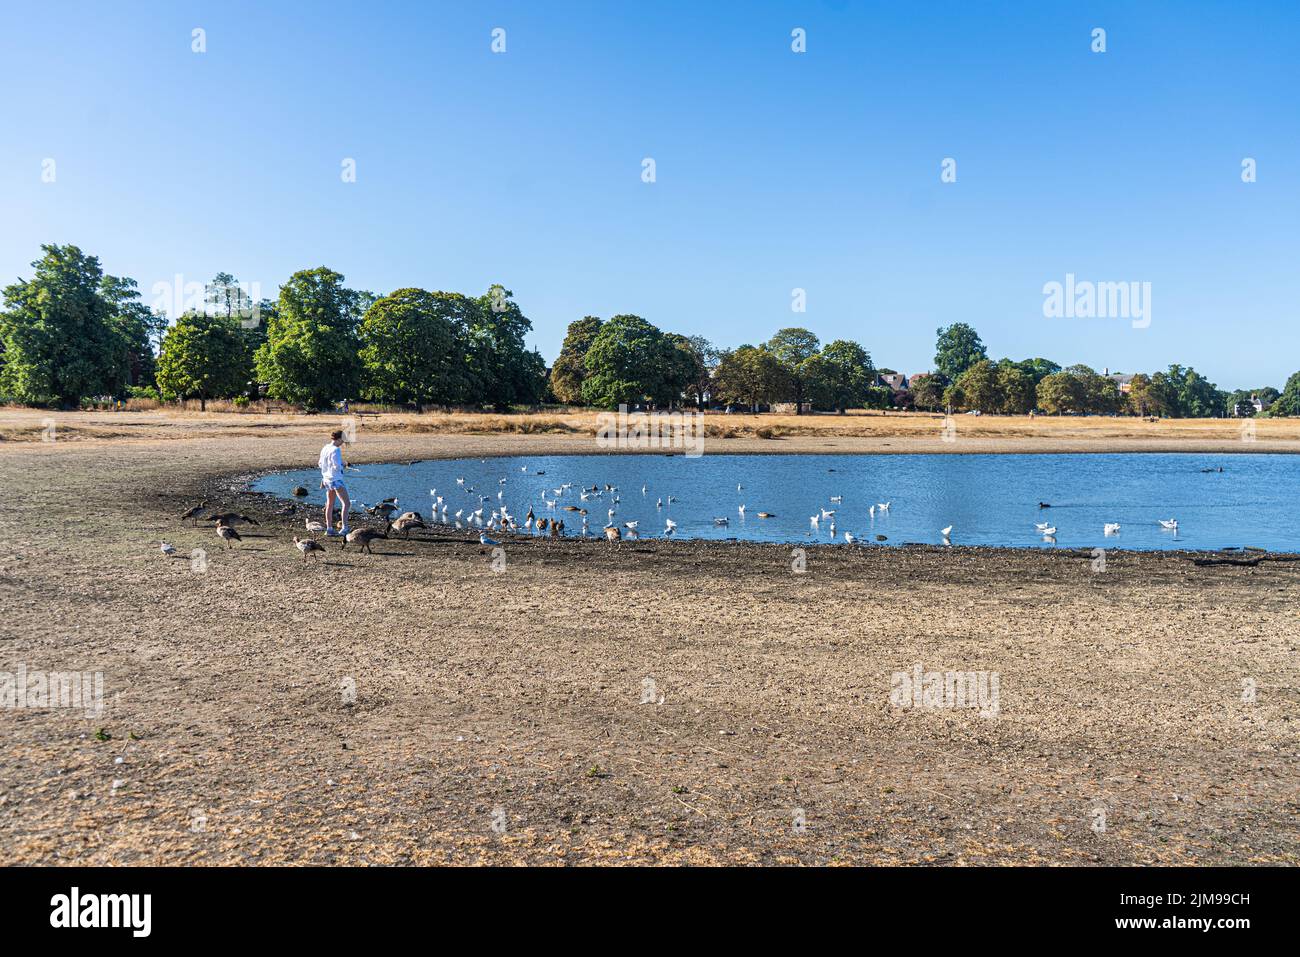 Wimbledon, London, UK. 5 August 2022 A member of the public feeding the geese on an almost empty looking Rushmere Pond on Wimbledon Common south-west London this morning as the dry weather continues to affect London. Thames water has said that millions of people in the south east of England are facing hosepipe and sprinkler bans as the biggest water supplier, said its reservoirs, rivers were lower than usual for the time of year due to the long spell of hot weather and the driest July on record in 100 years Credit. amer ghazzal/Alamy Live News Stock Photo